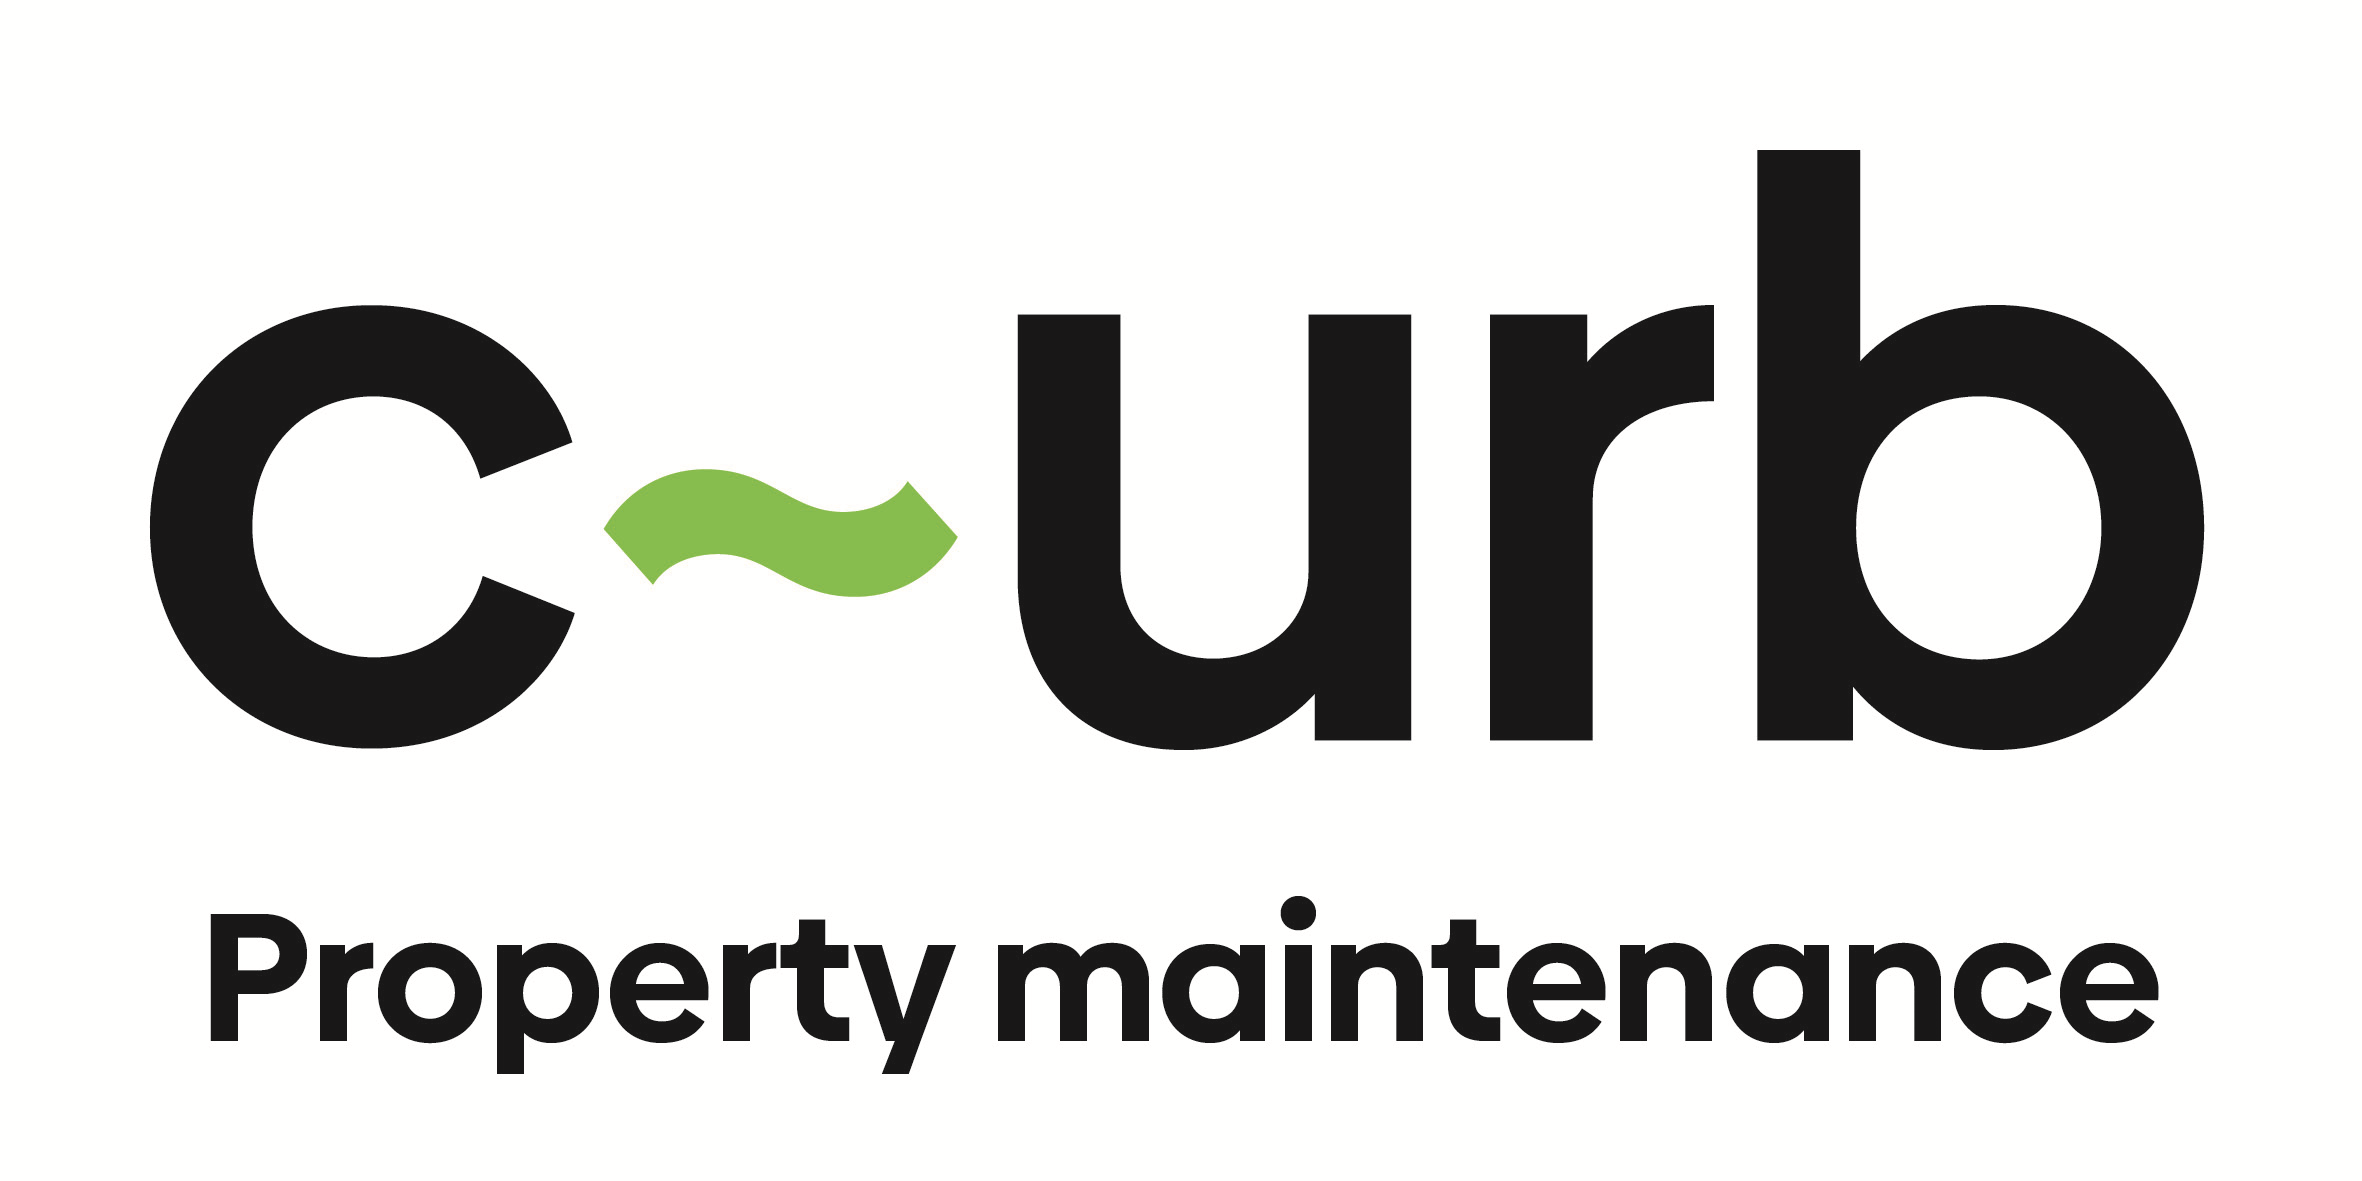 C~urb puts health and safety first with new accreditation